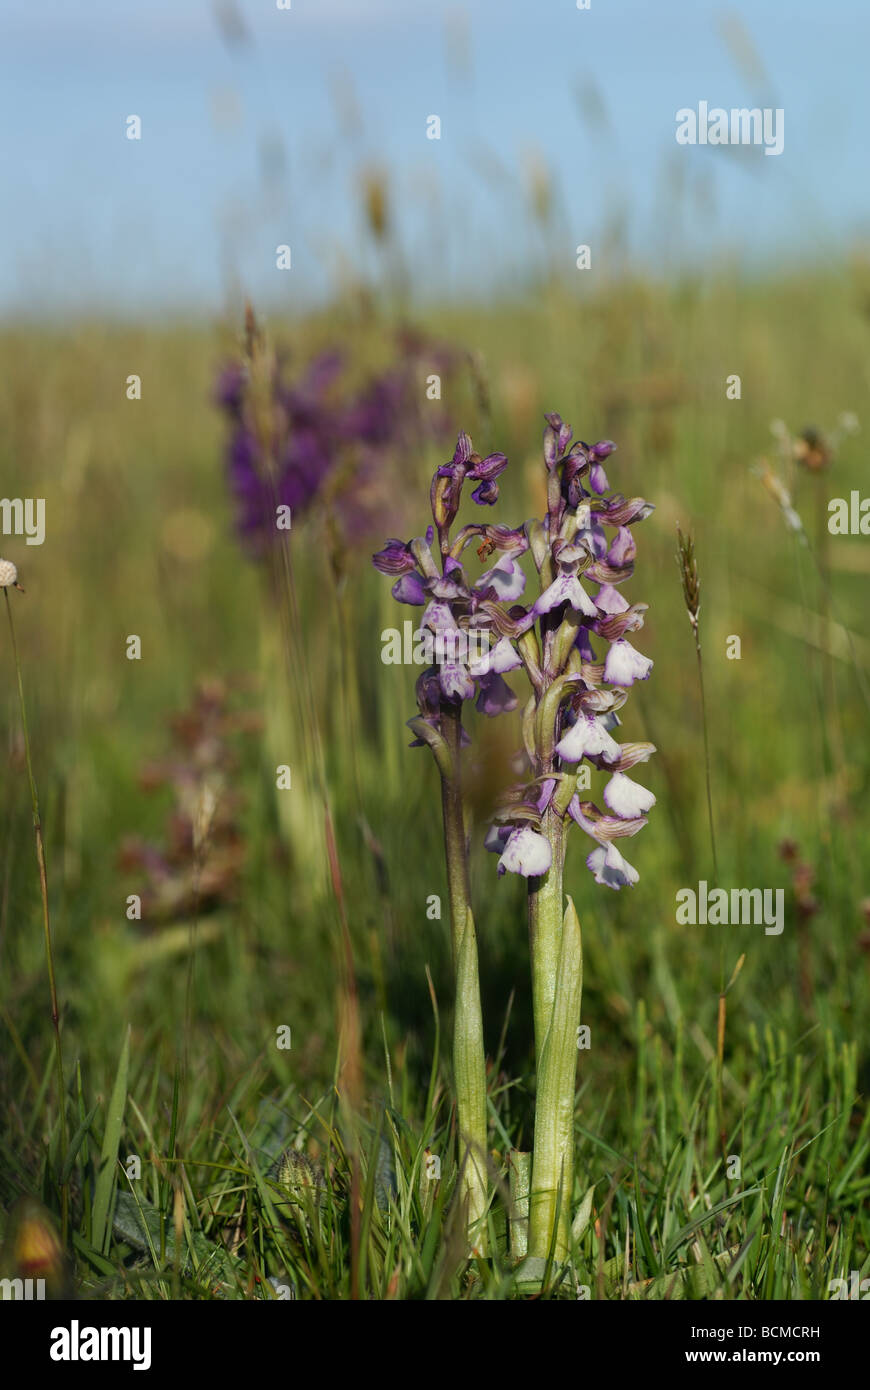 Green-winged Orchid / Green-veined Orchid (Anacamptis Morio) Stockfoto